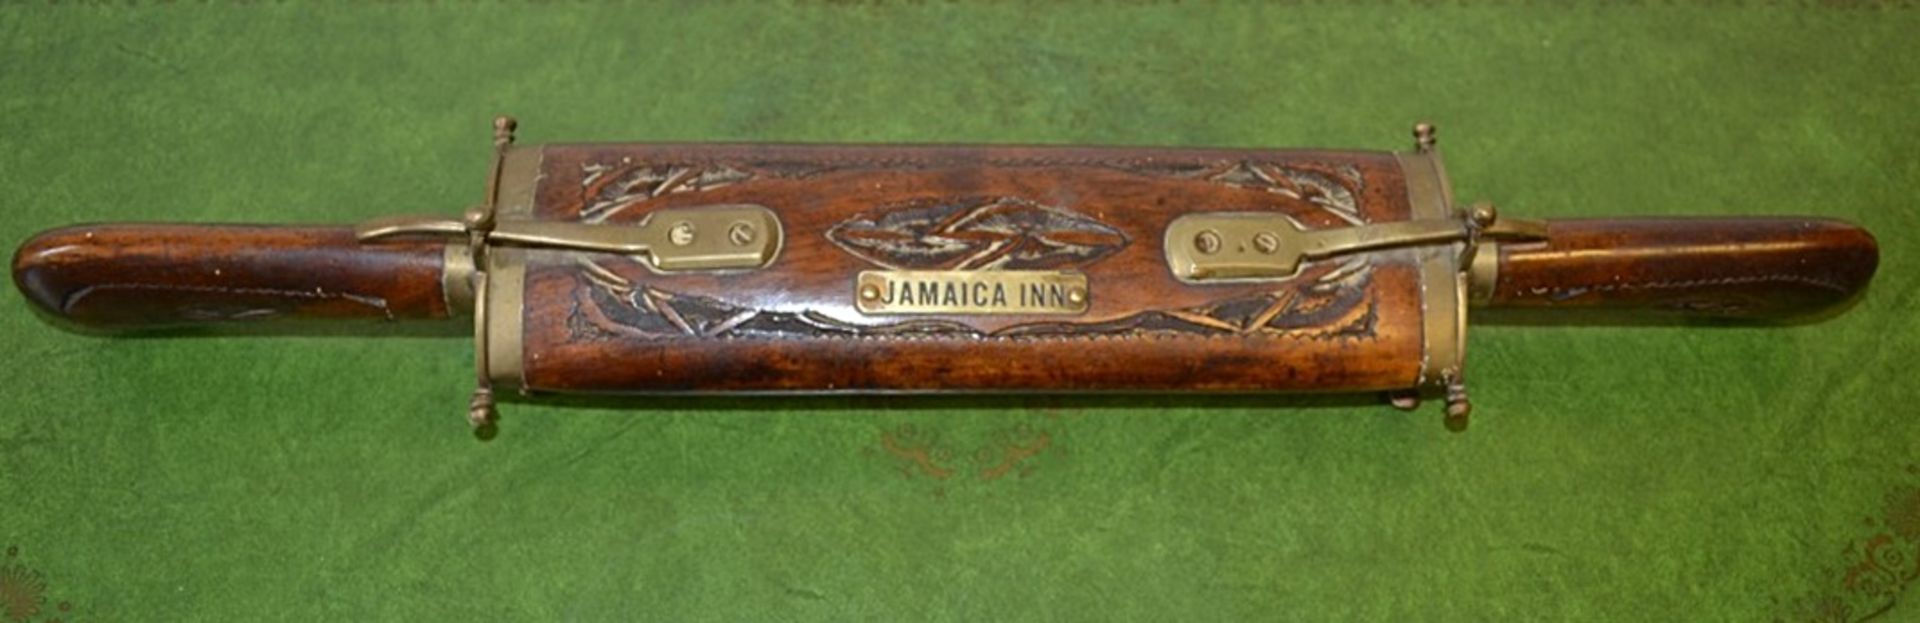 1 x Vintage "Jamaica Inn" Branded Souvenir Knife / Fork - From A Grade II Listed Hall In Fair - Image 3 of 5